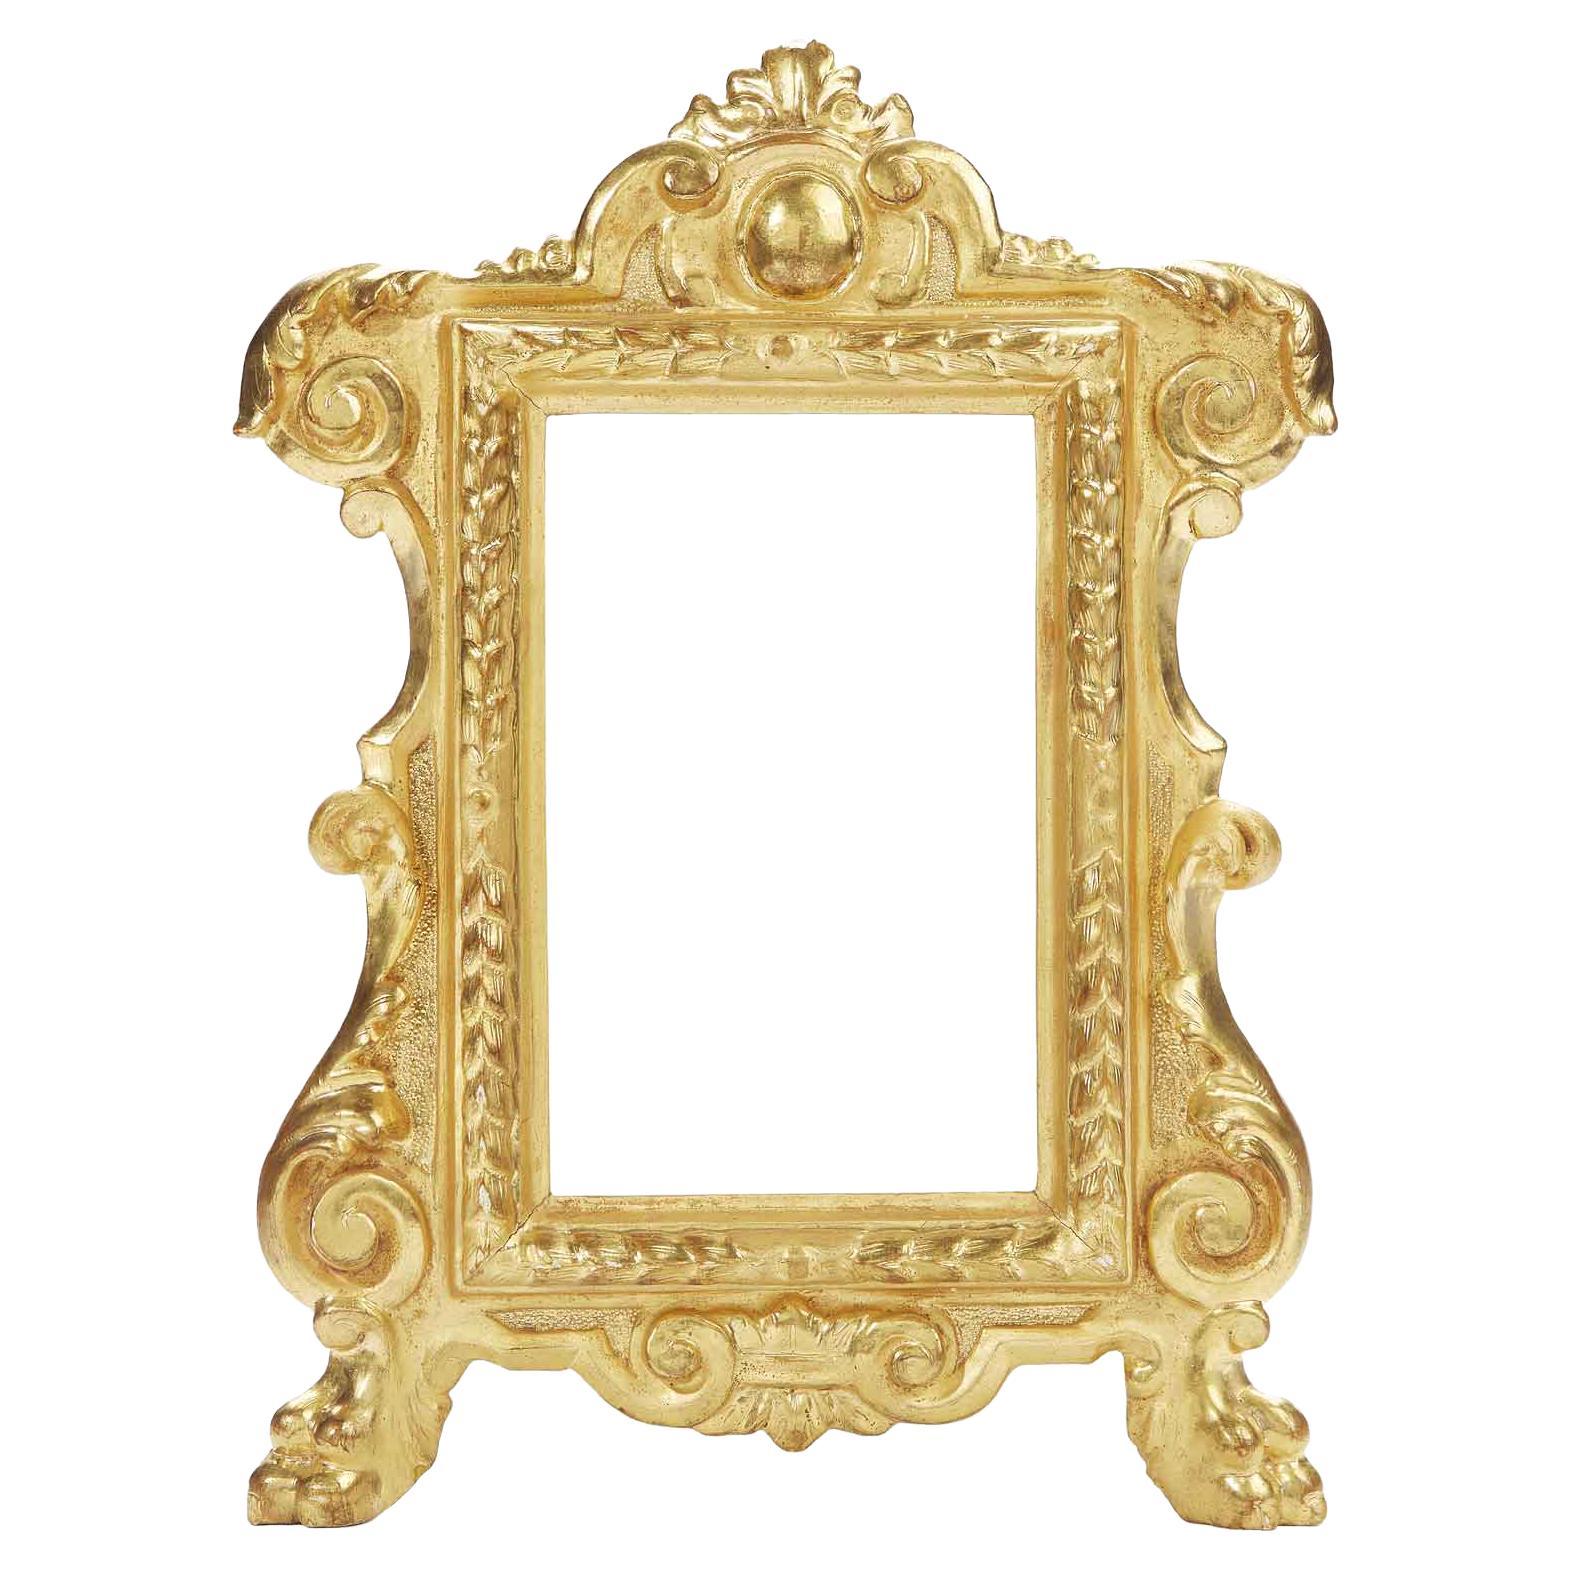 Early 19th Century Italian Frame Carved Gilt Wood Louis XV Style Frame